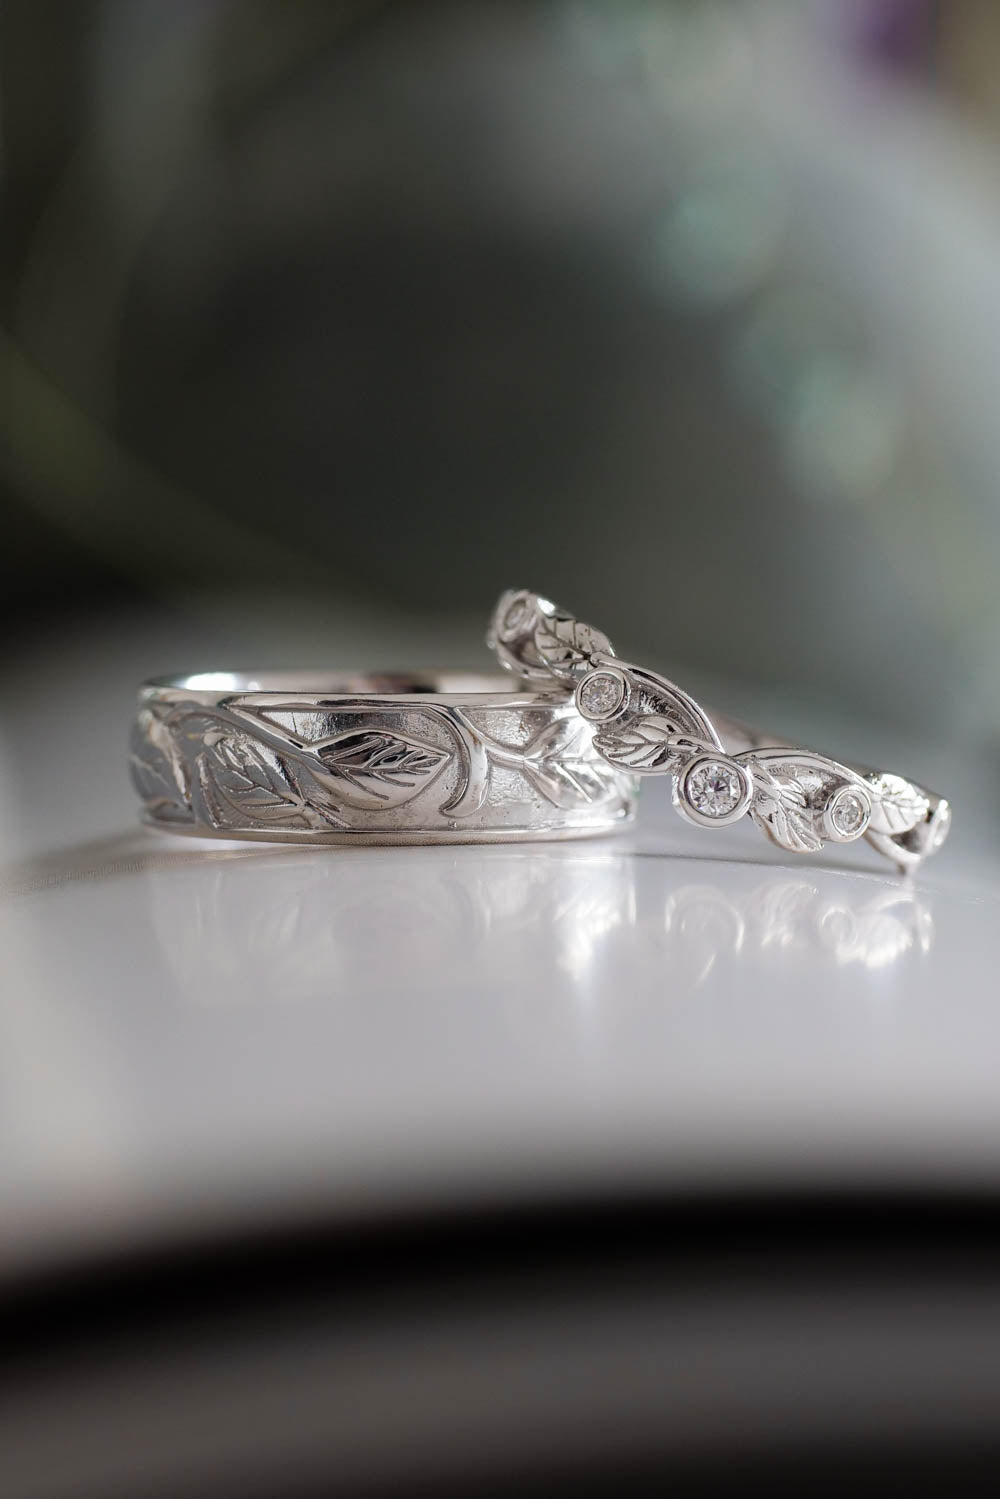 white gold weeding rings for her and him together on the table, leaves details on the gold